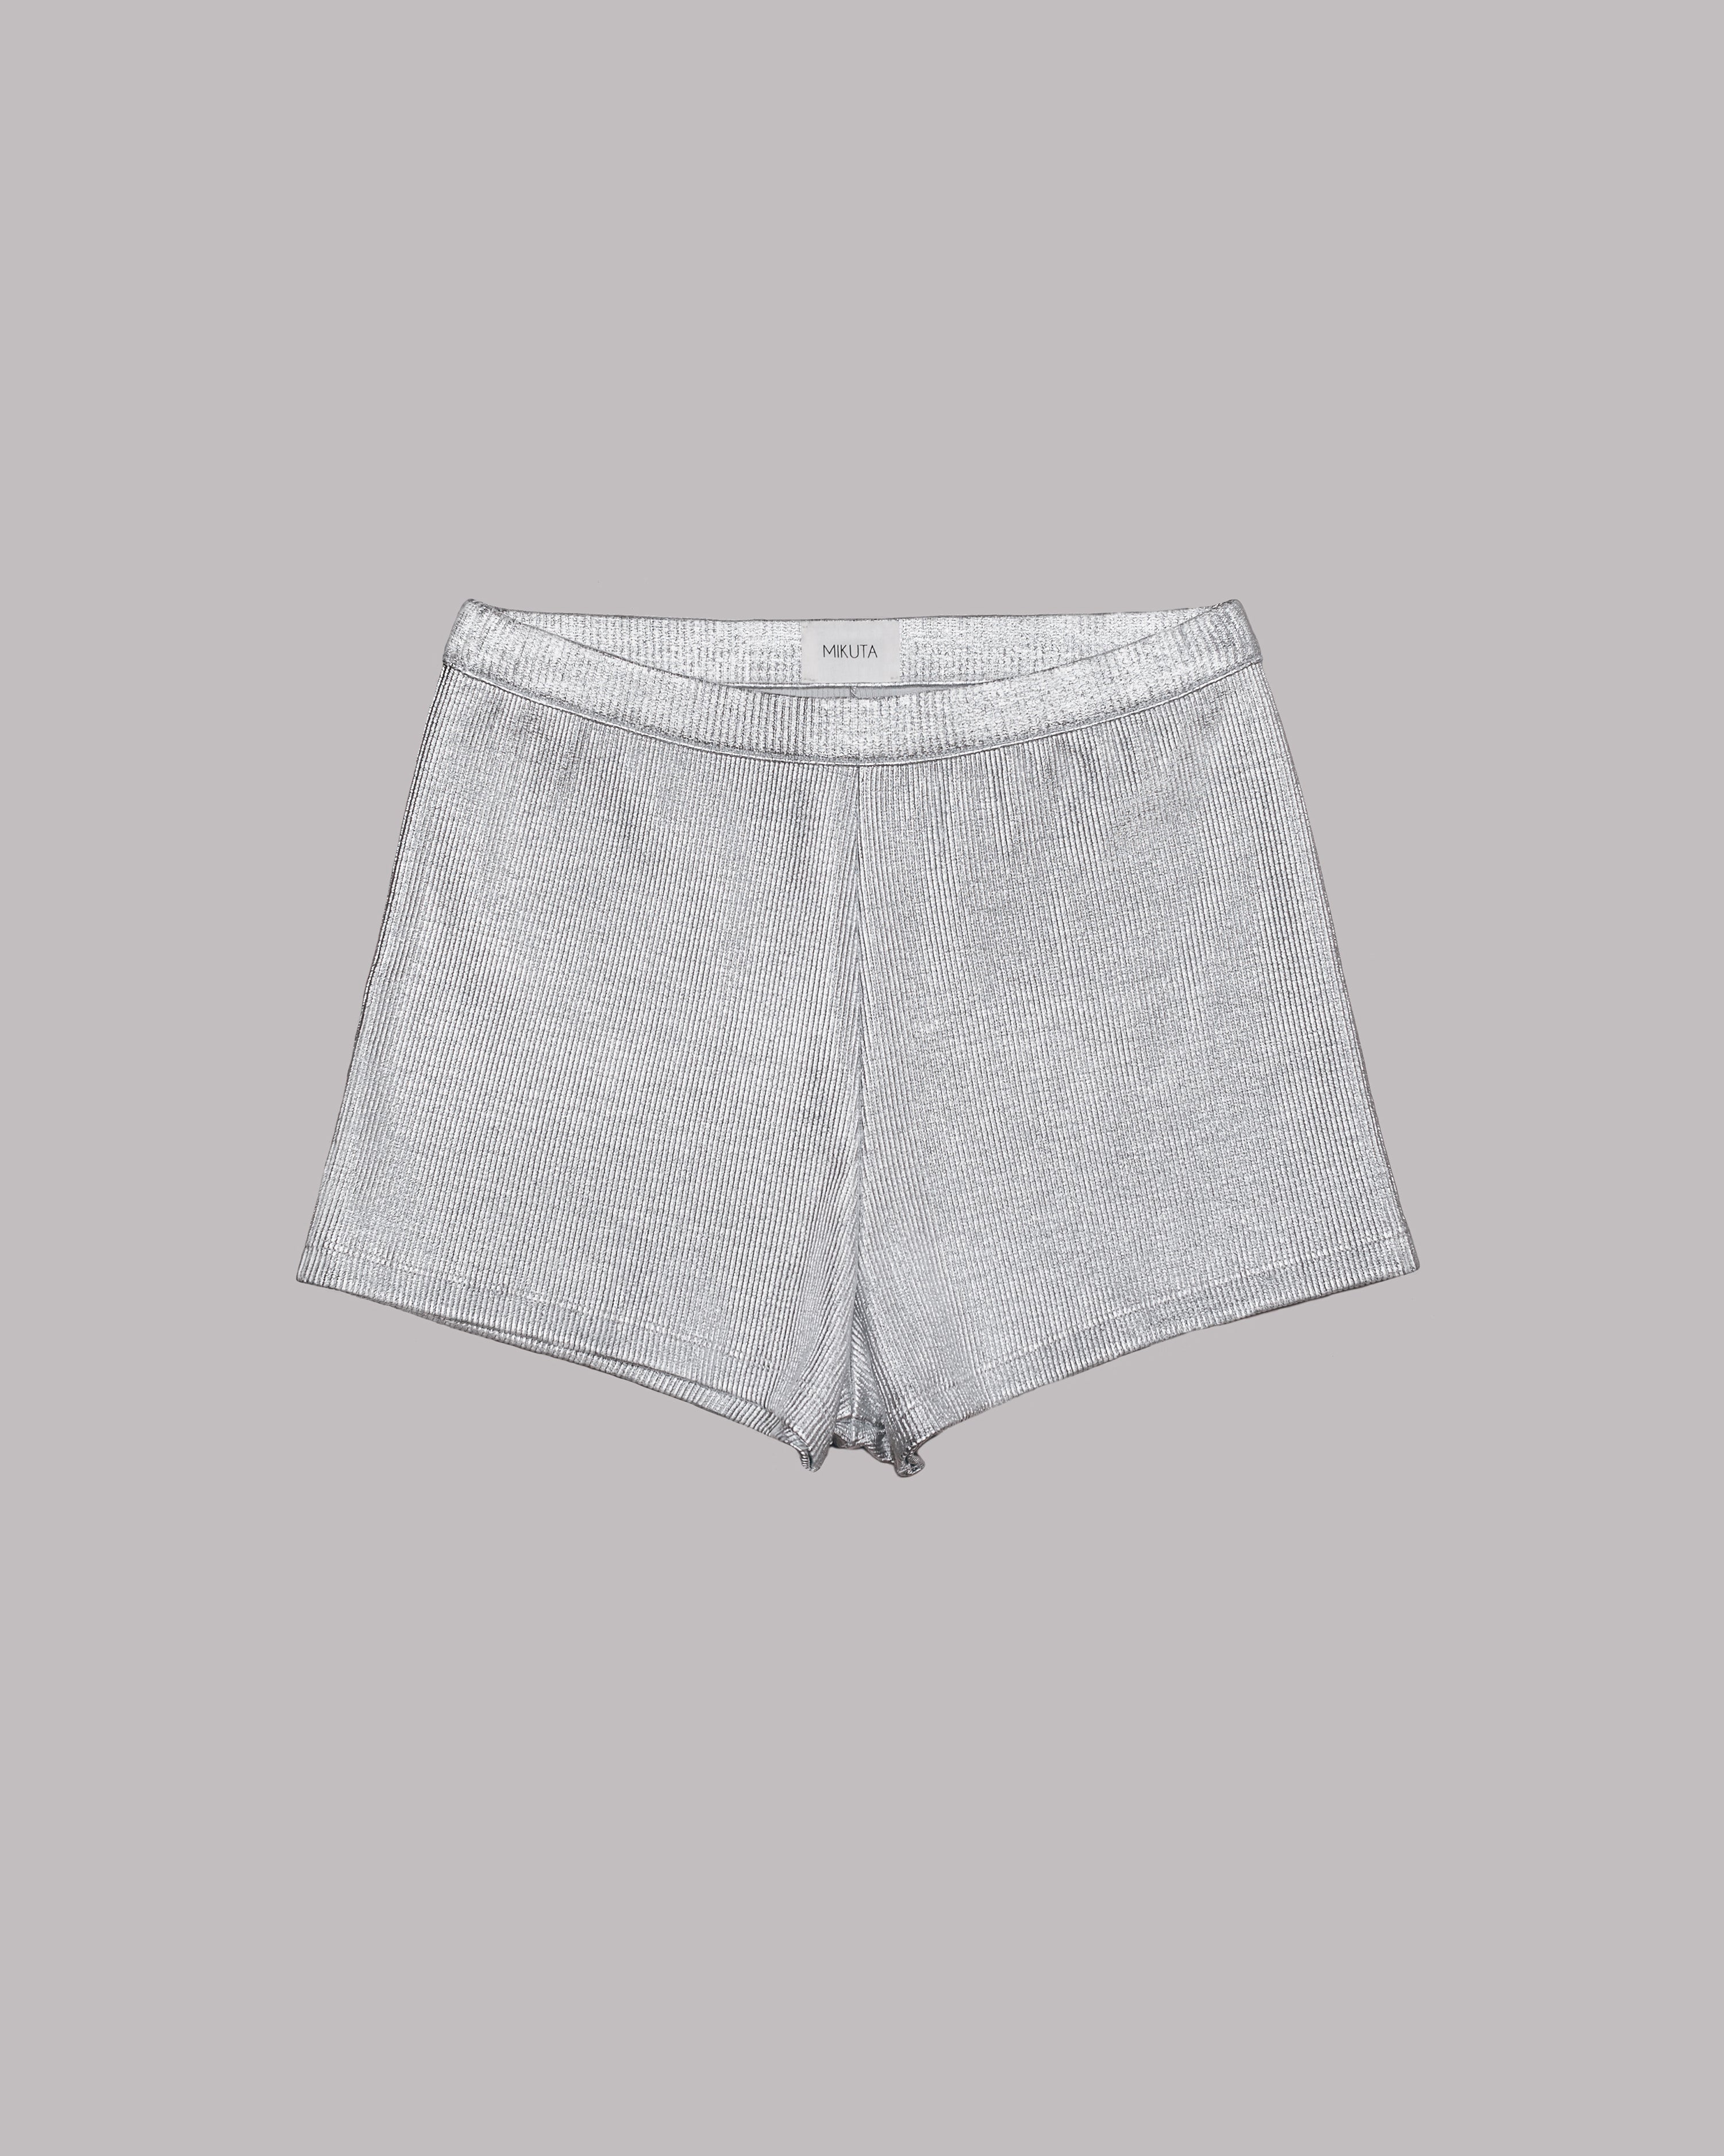 The Silver Coated Ribbed Shorts